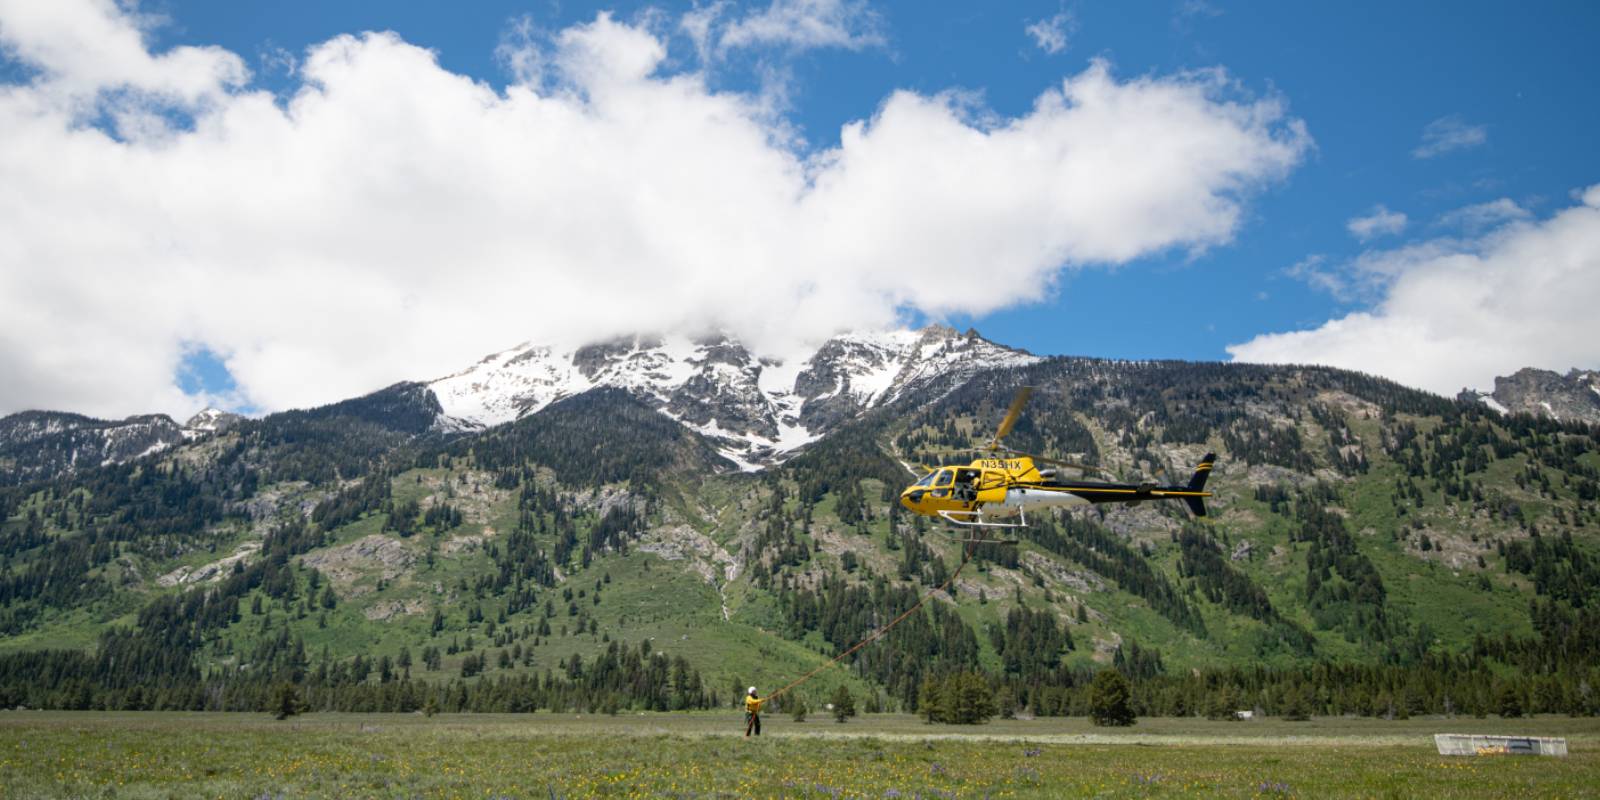 Rescue Helicopter lifting a person - Jenny Lake Rangers